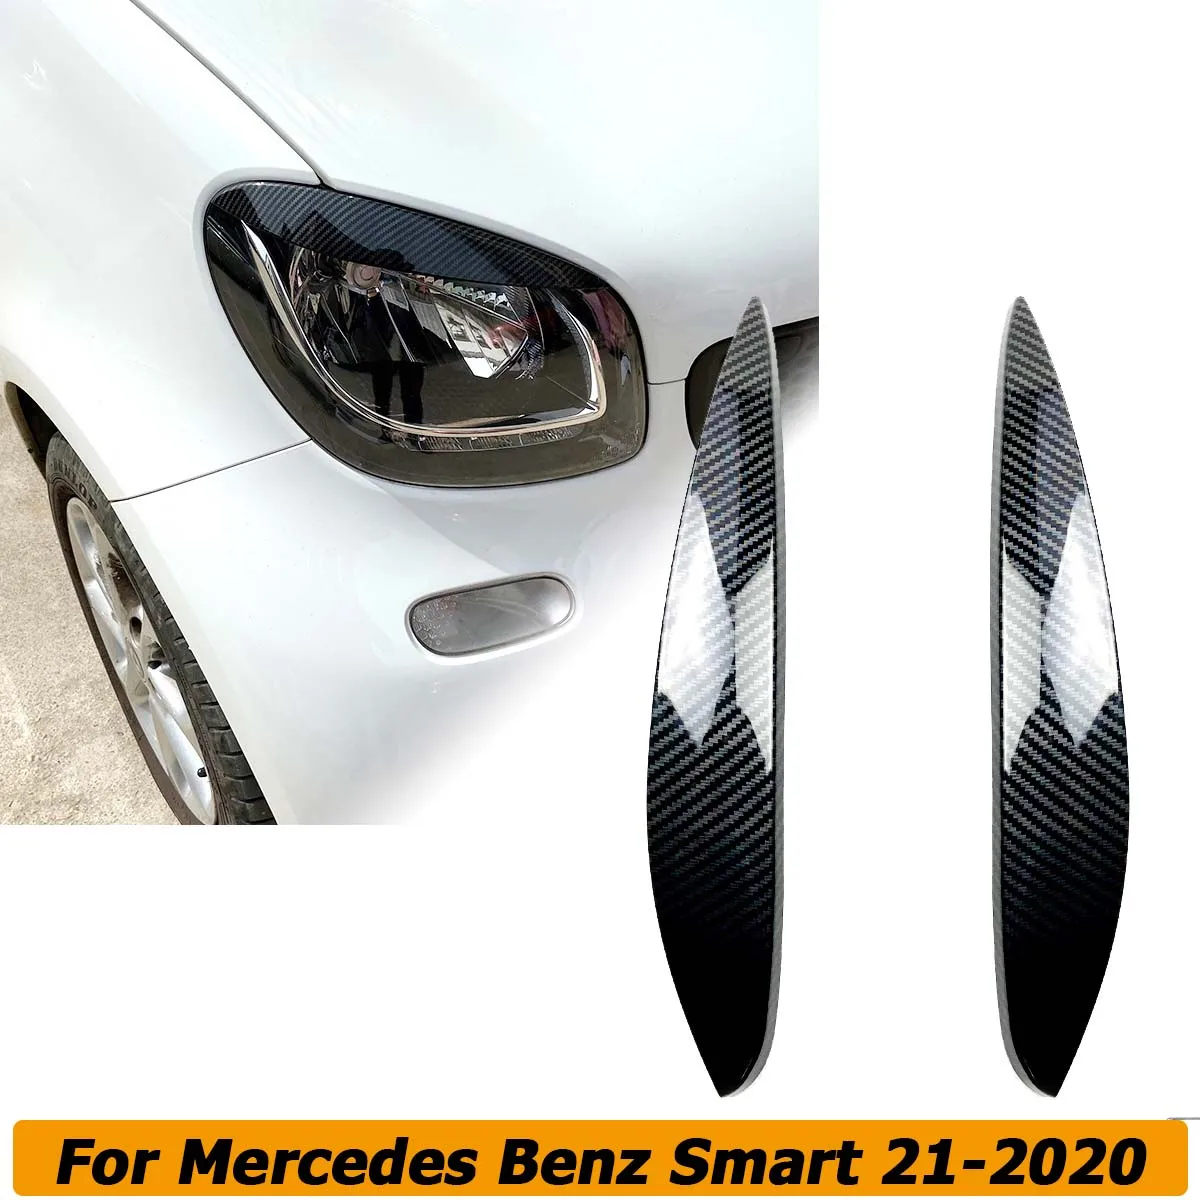 

Front Eyebrow Headlight Headlamp Eyelid Cover Trim Sticker For Mercedes Benz Smart 453 Fortwo Forfour 2015-2020 Car Accessories